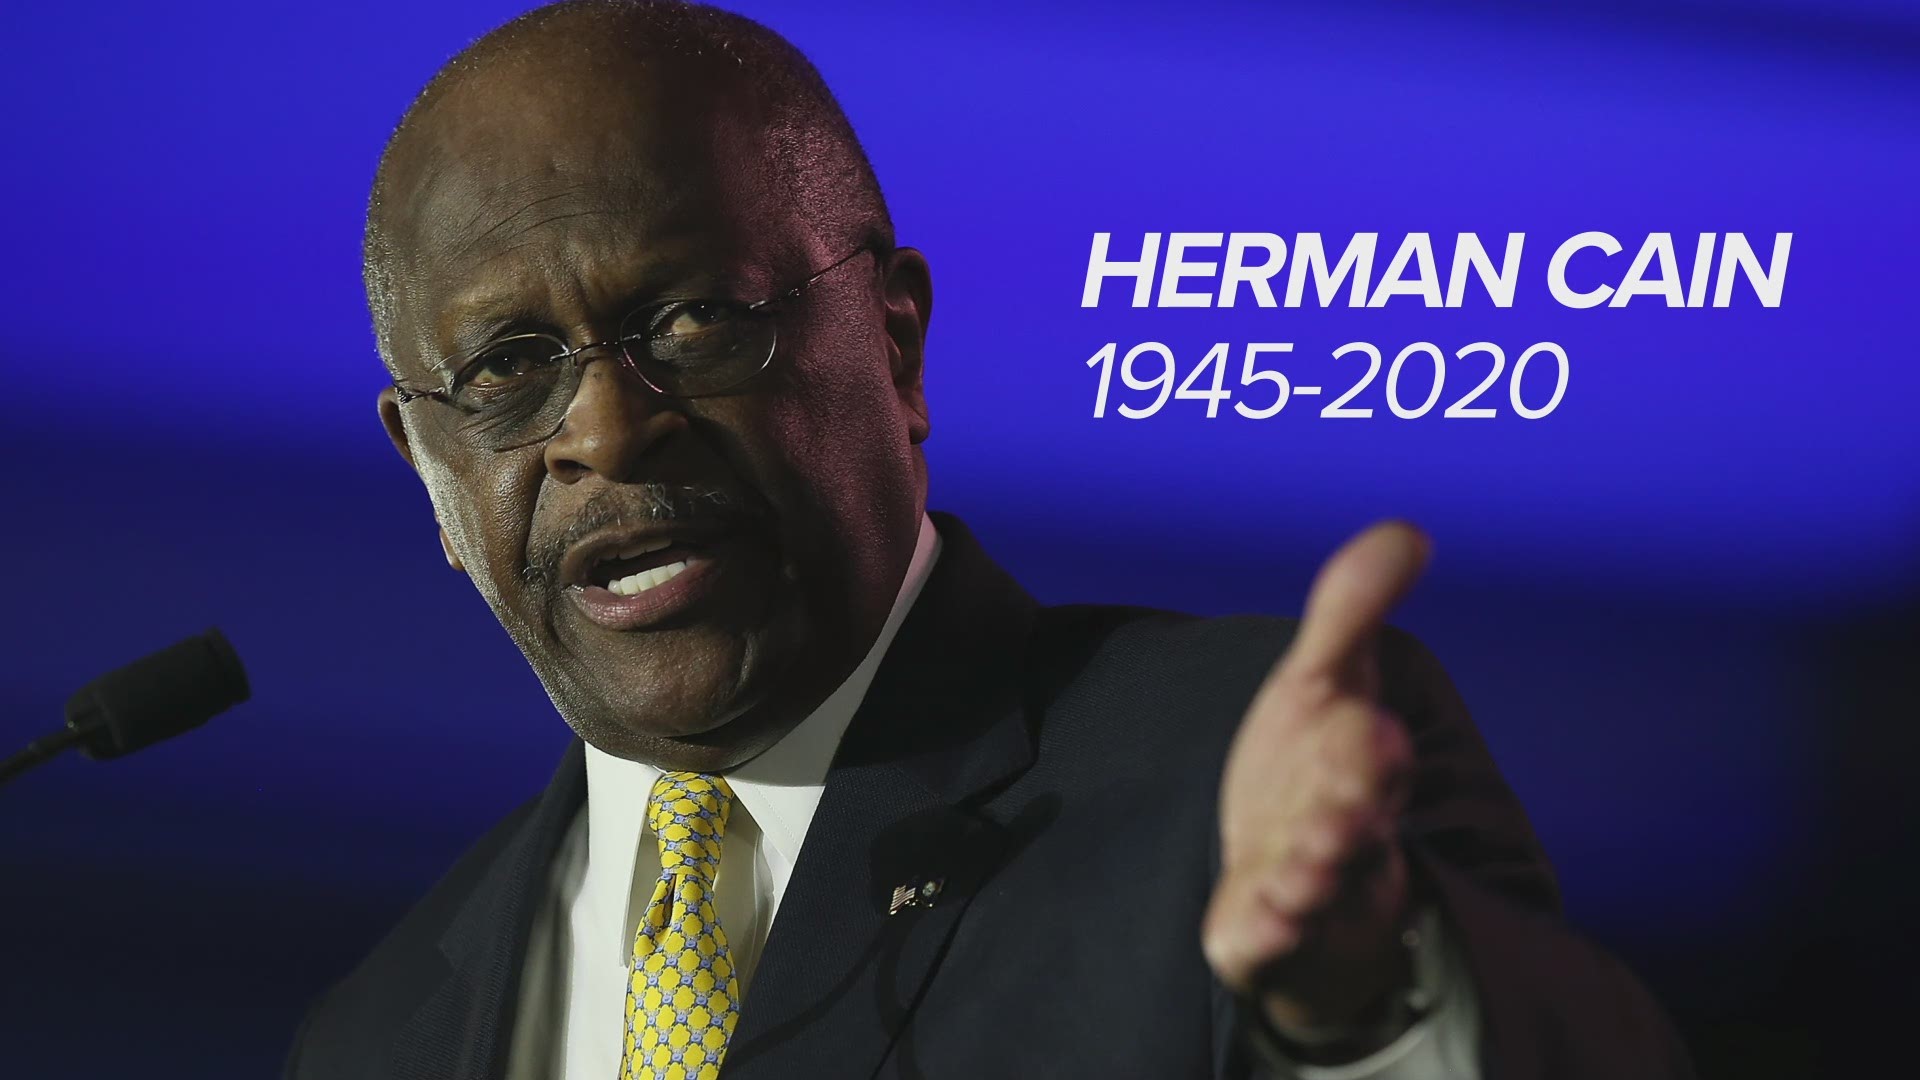 Herman Cain, former CEO of Godfather's Pizza and GOP presidential hopeful, has died at age 74 after being hospitalized with COVID-19.